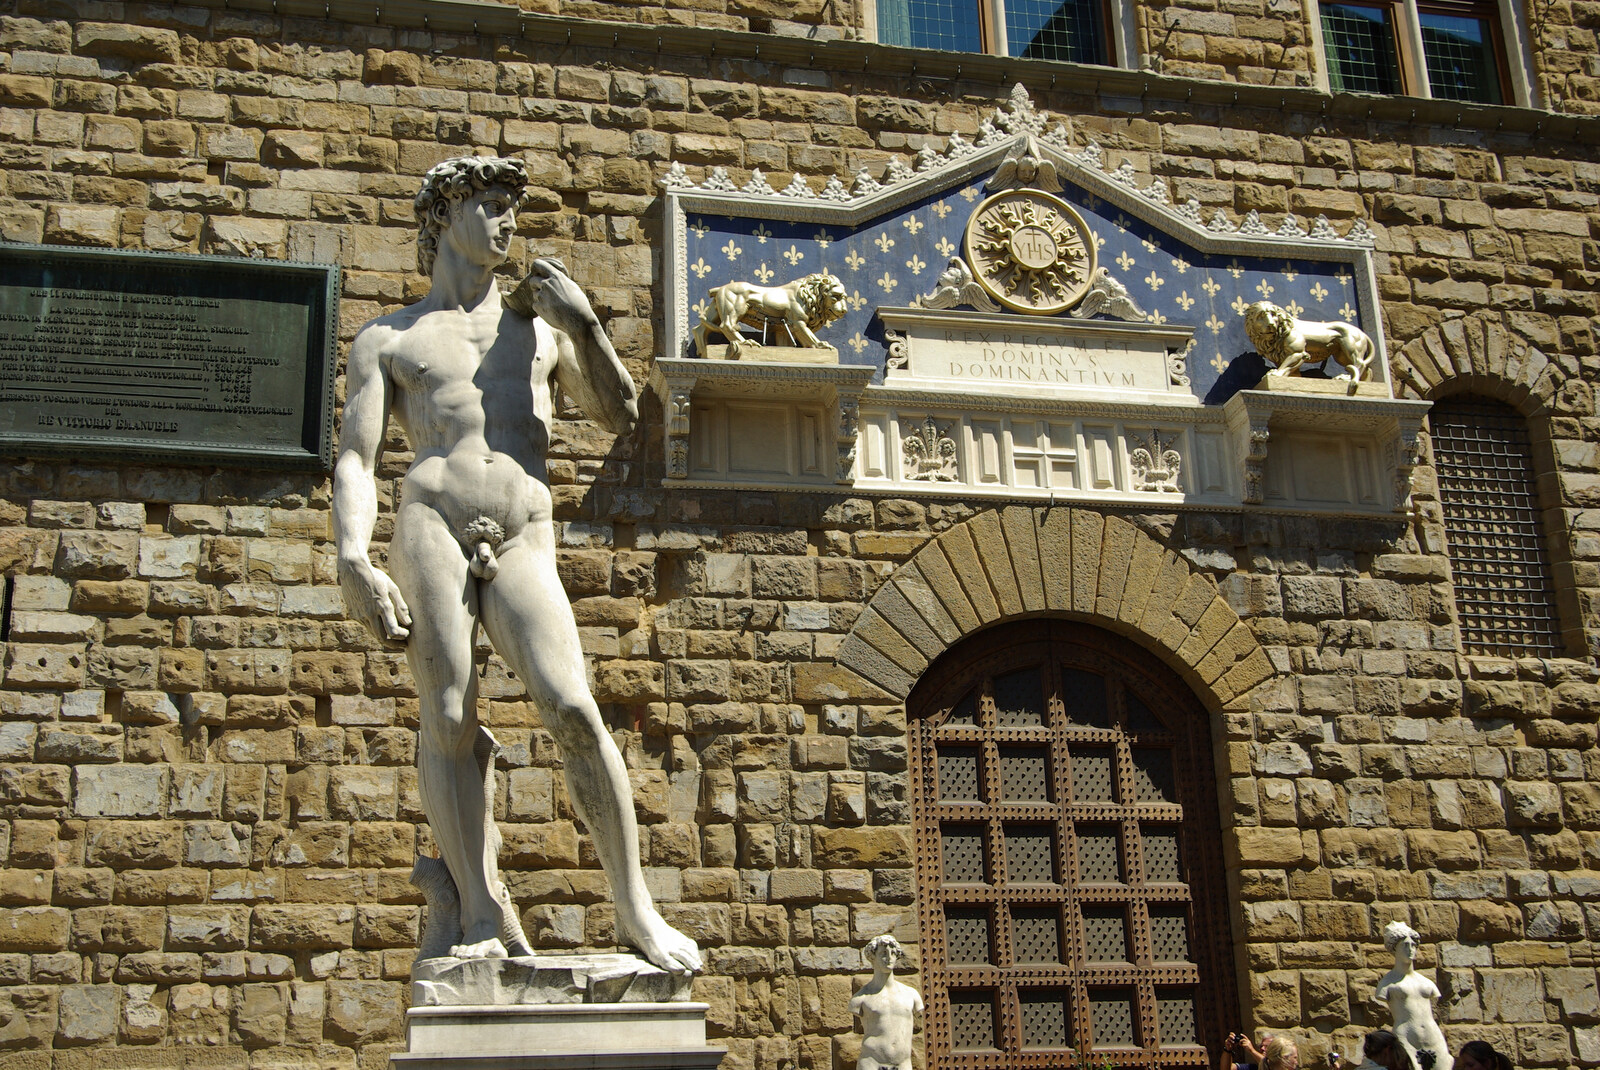 A Day Trip to Firenze, Tuscany, Italy - 24th July 2008: The fake David flashes his wang at the crowds